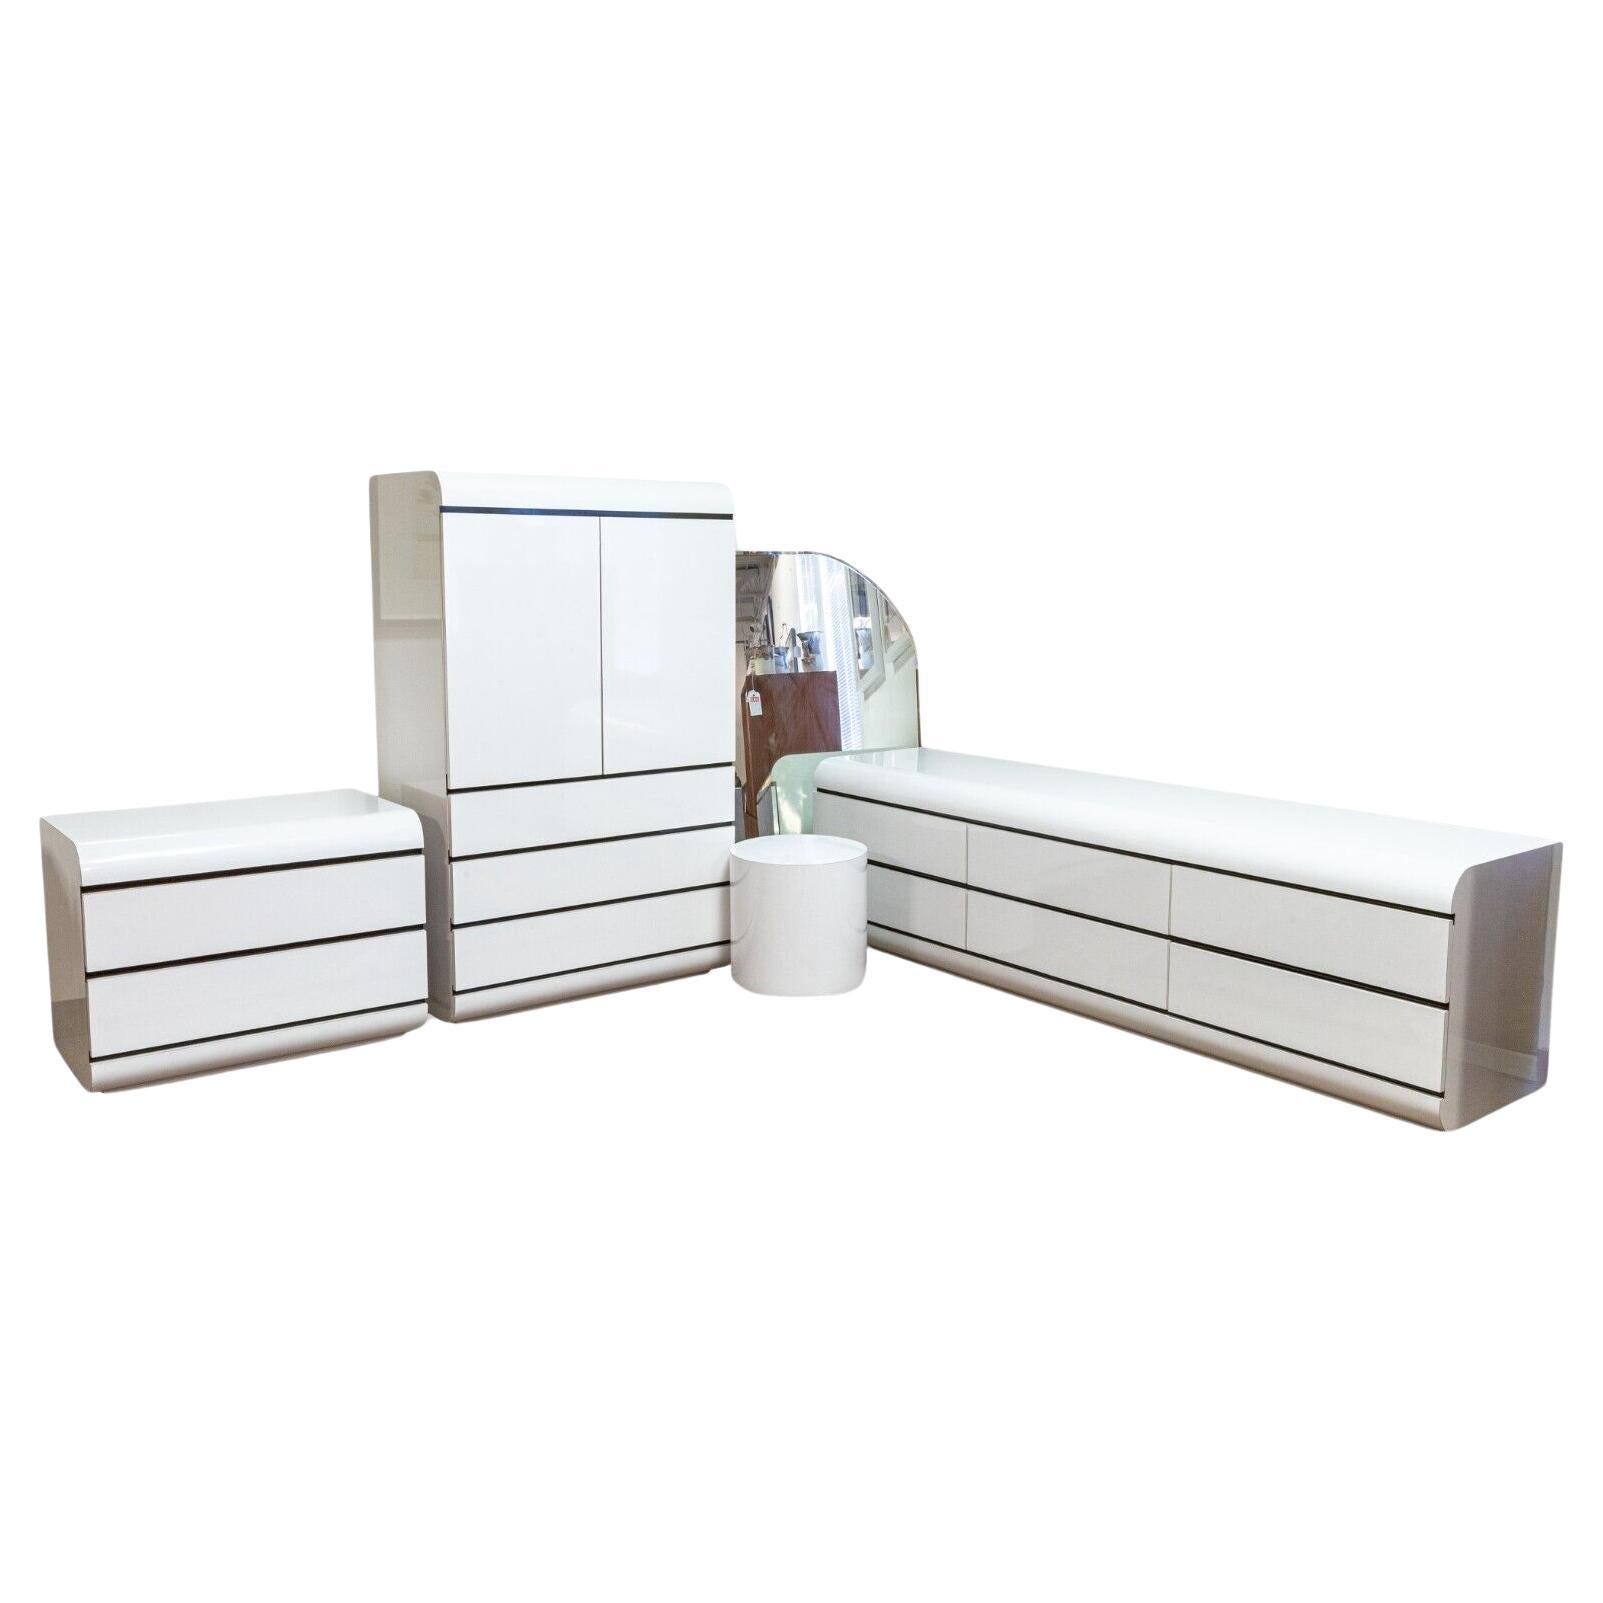 Fratelli Saporiti Contemporary Modern White Lacquered 5pc Bedroom Set For Sale